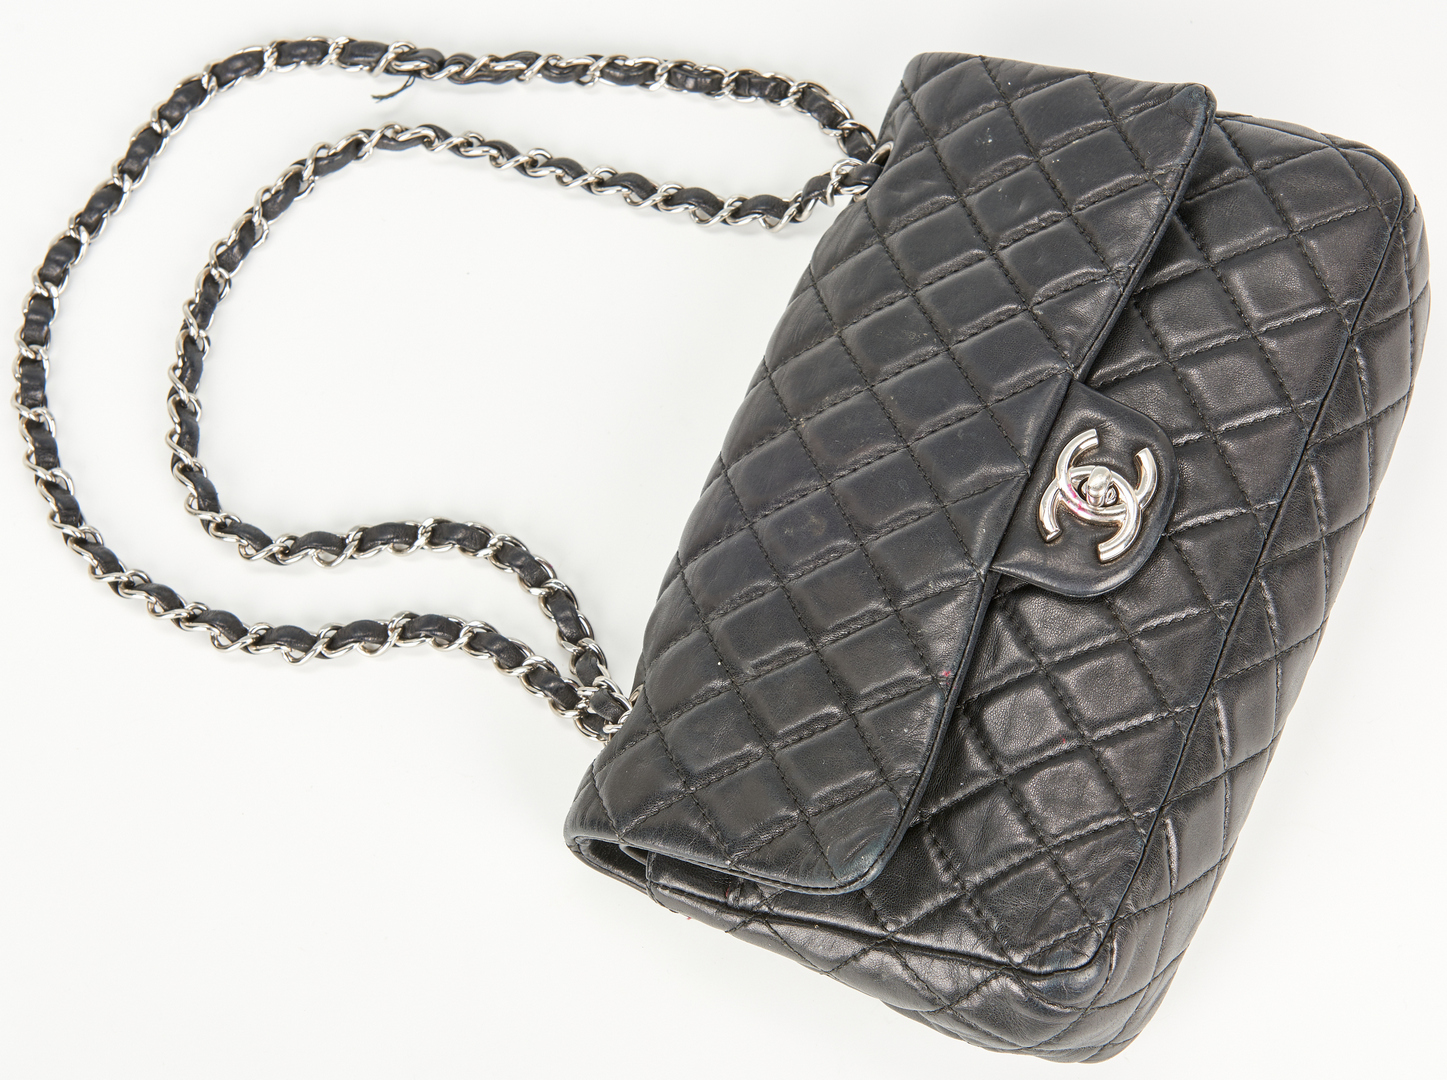 Lot 708: Chanel Classic Double Flap Black Quilted Purse, Small